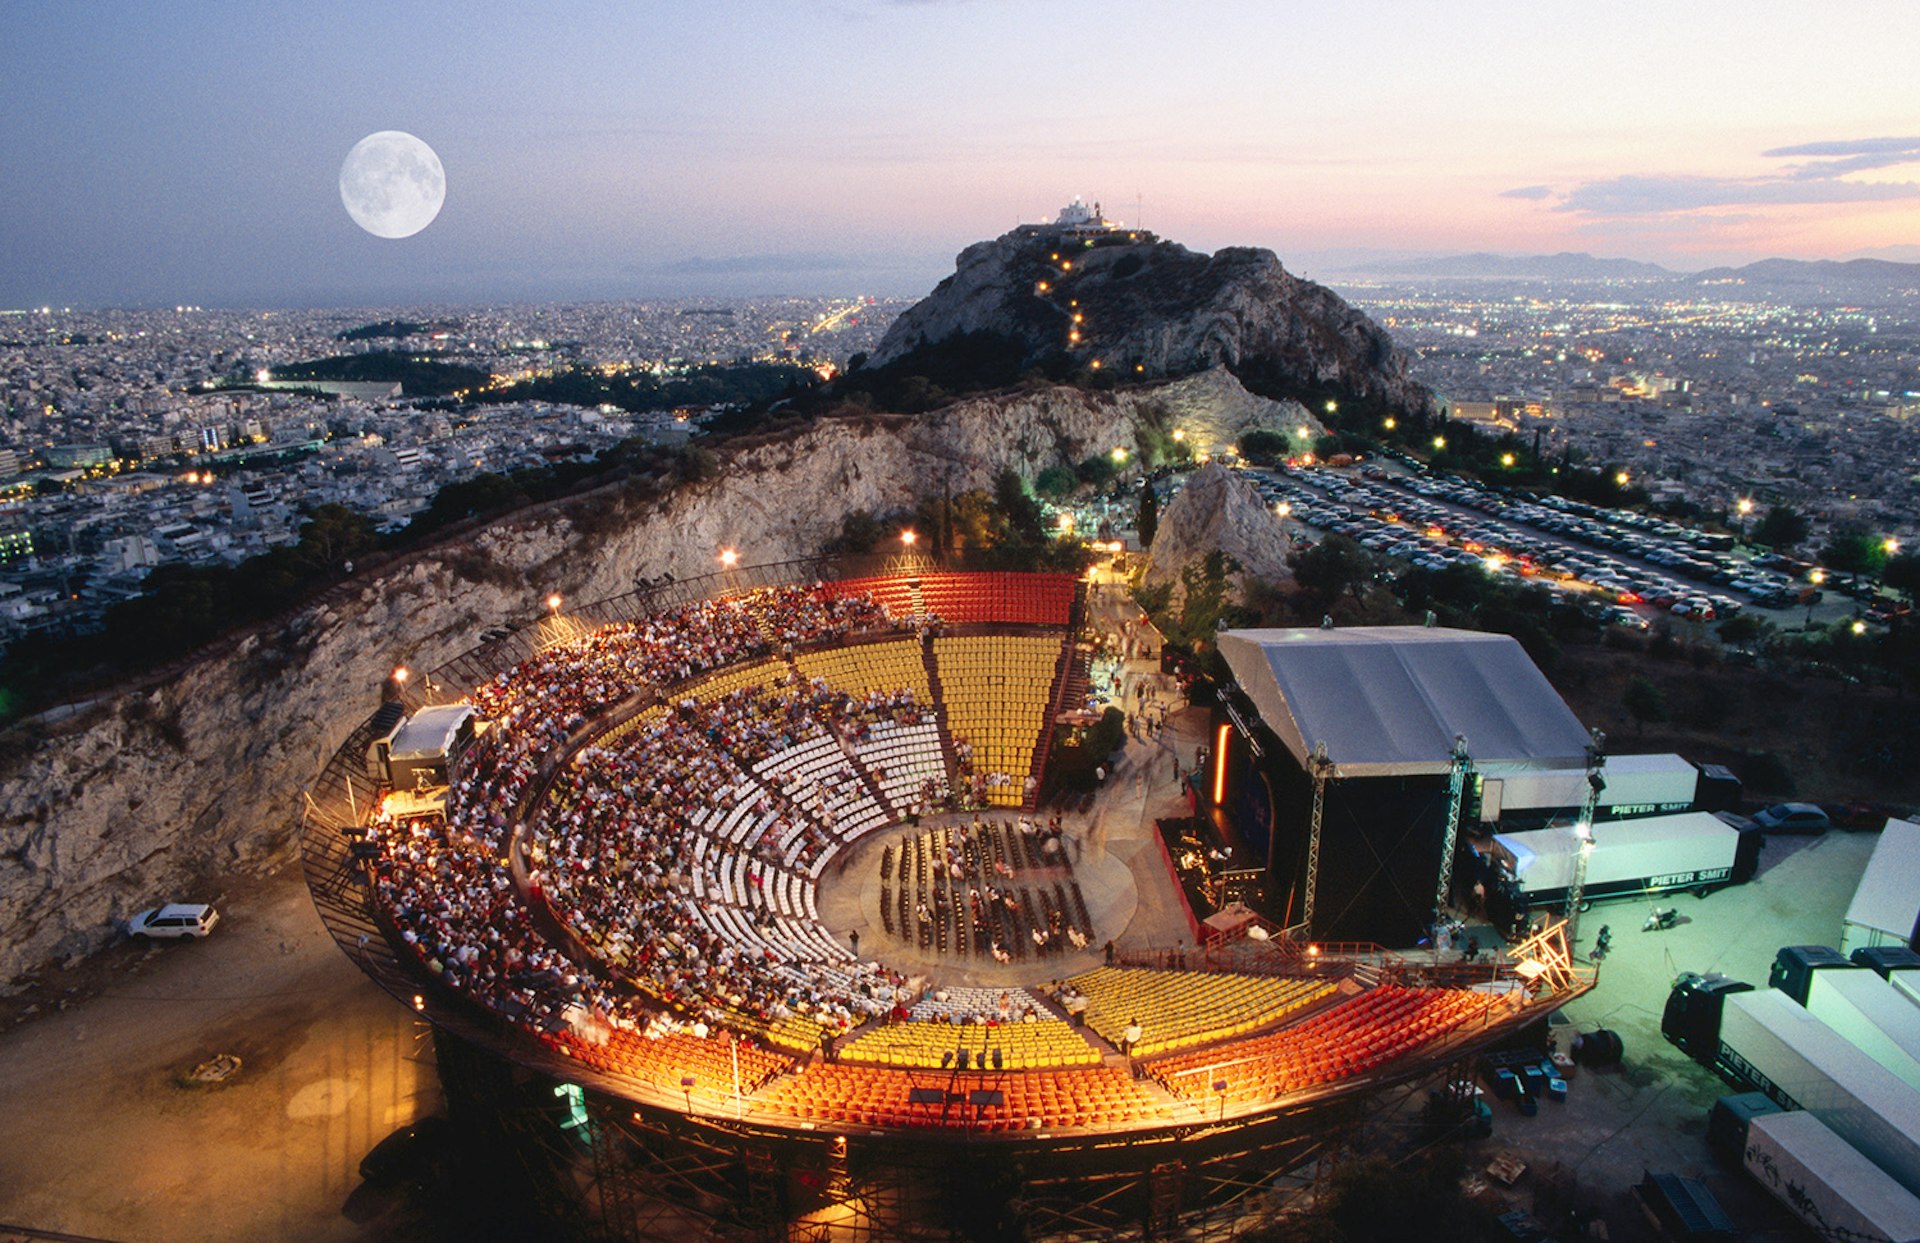 Athens' Lycabettus Theatre must be one of the world's most dramatic backdrops for...drama. Image George Tsafos / Lonely Planet Images / Getty Images